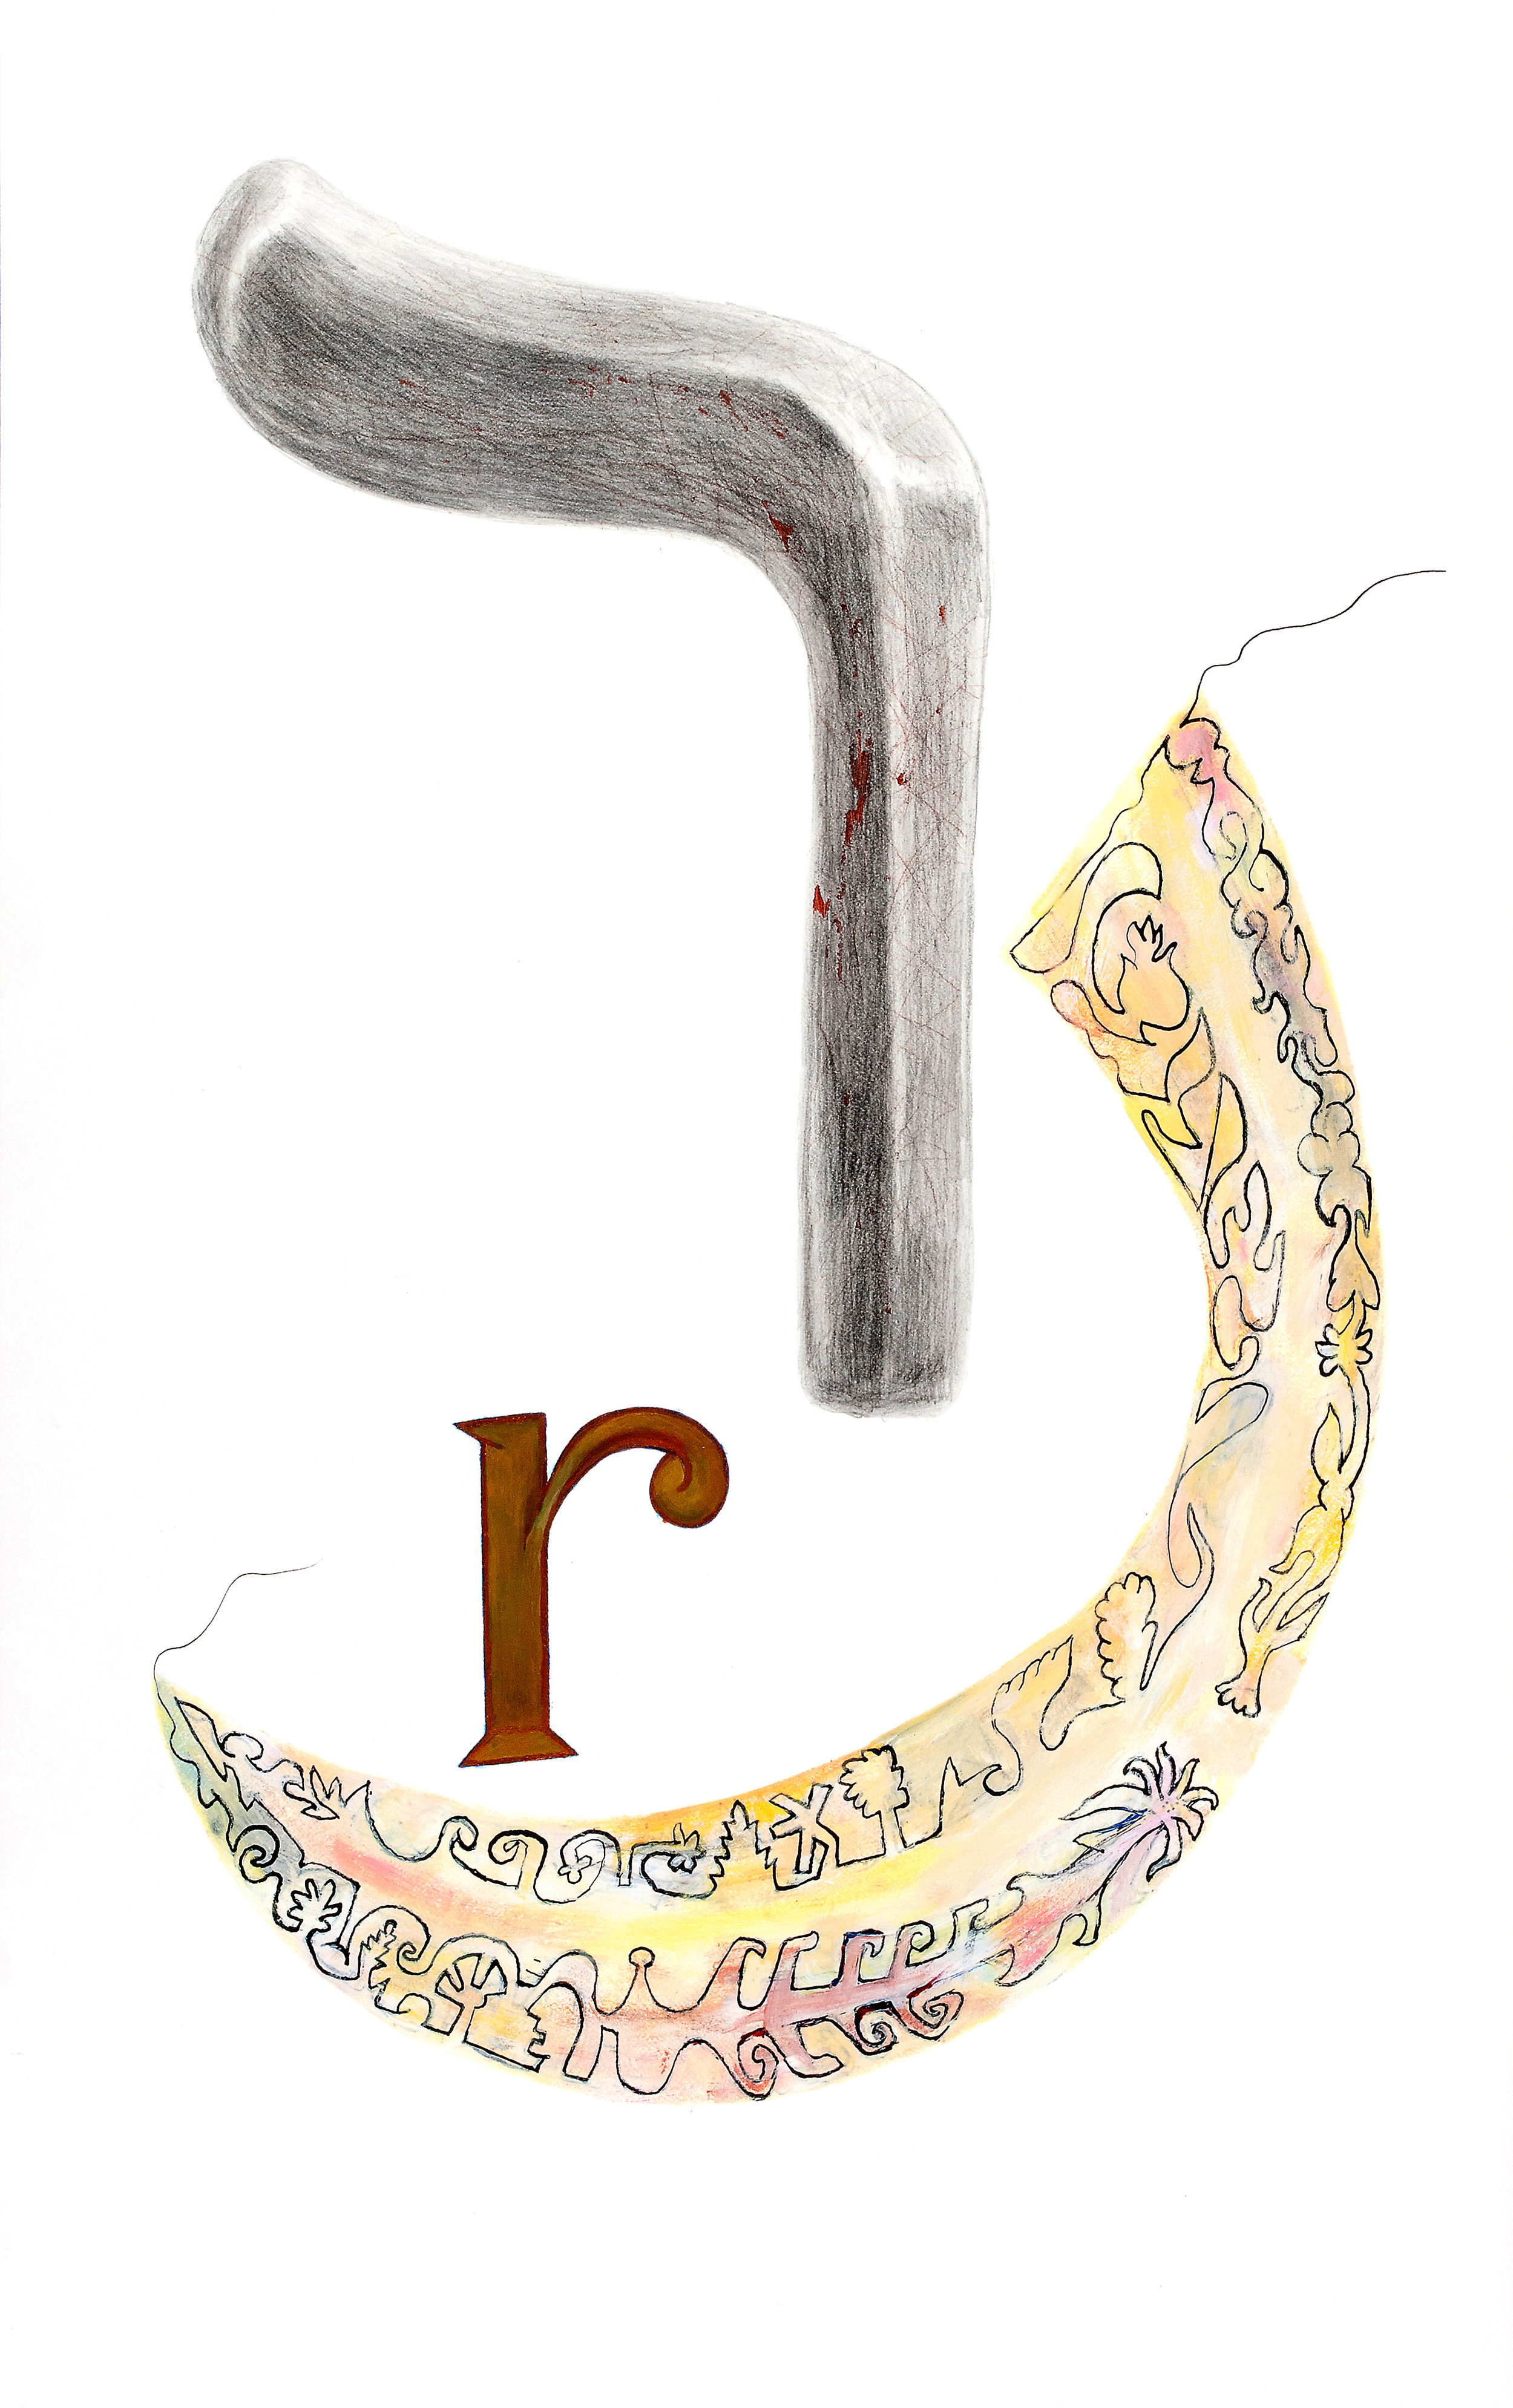    Arabic&nbsp;Raa and&nbsp;Hebrew&nbsp;Resh, with R   mixed media on paper, 22 x 15 inches 